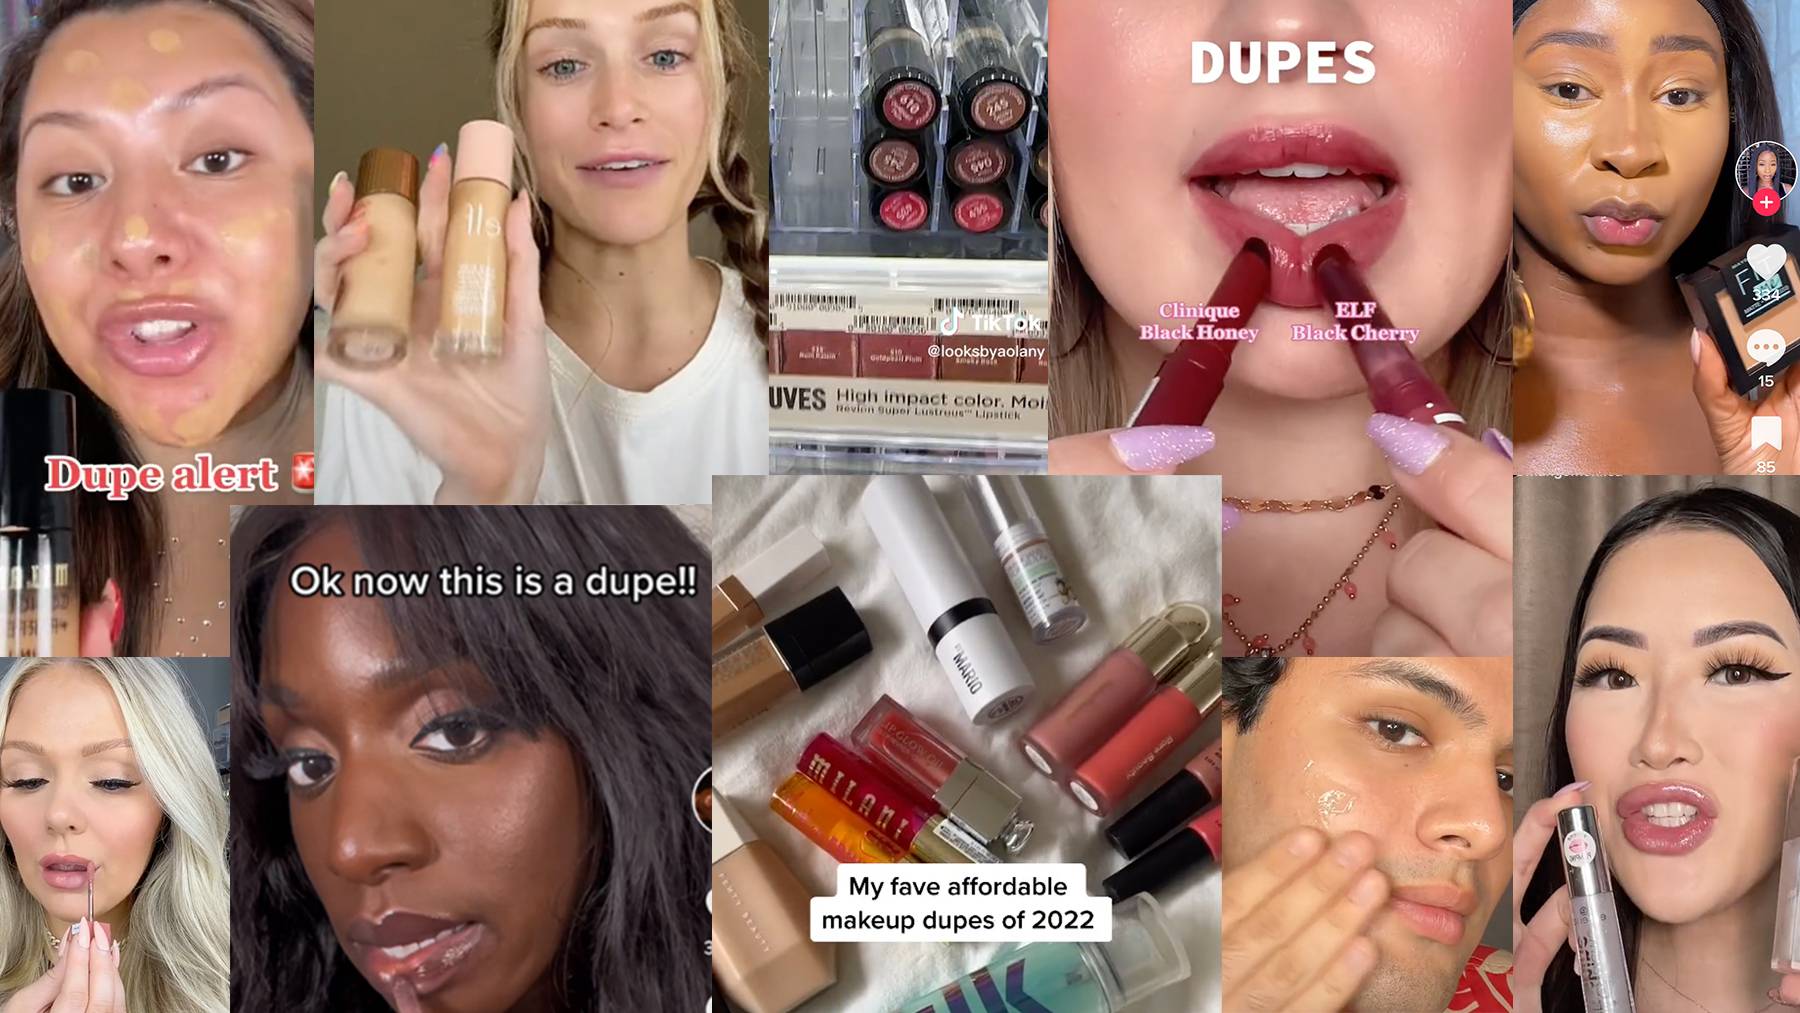 Gen-Z's dupe obsession is shaking up beauty.